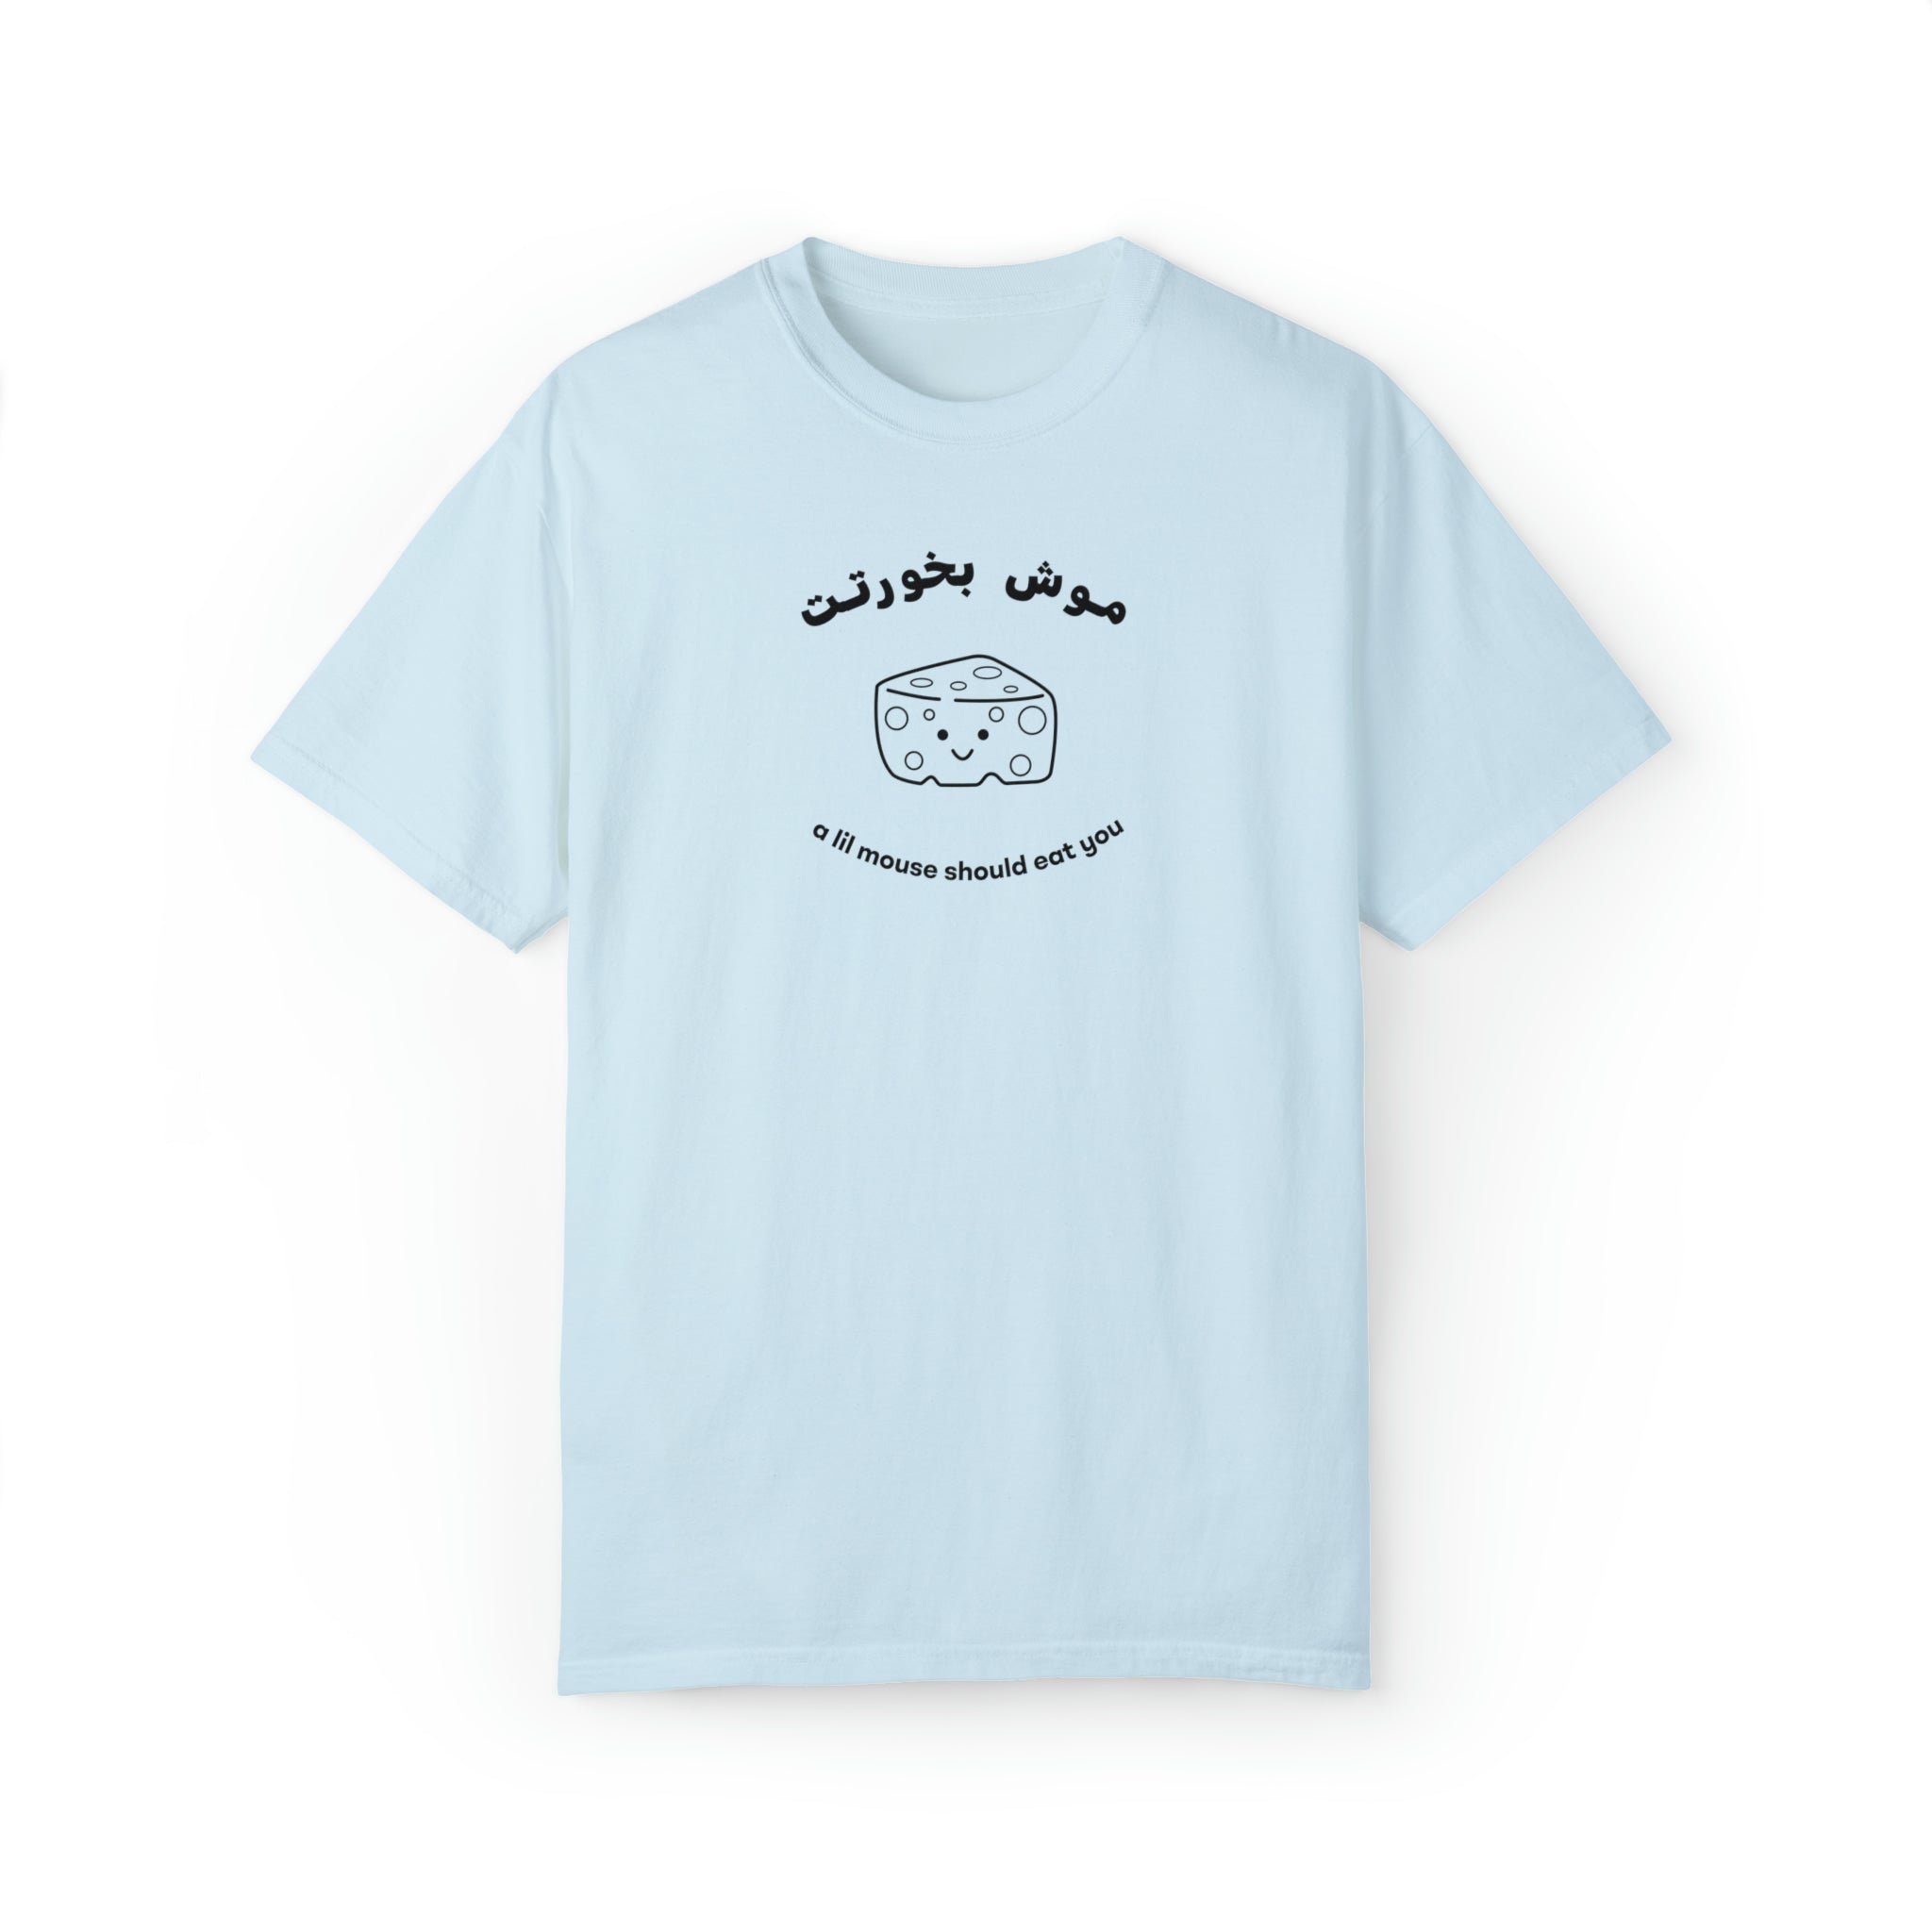 Moosh Bokhoradet, A Lil Mouse Should Eat You - FUNNY CULTURE SHIRTS